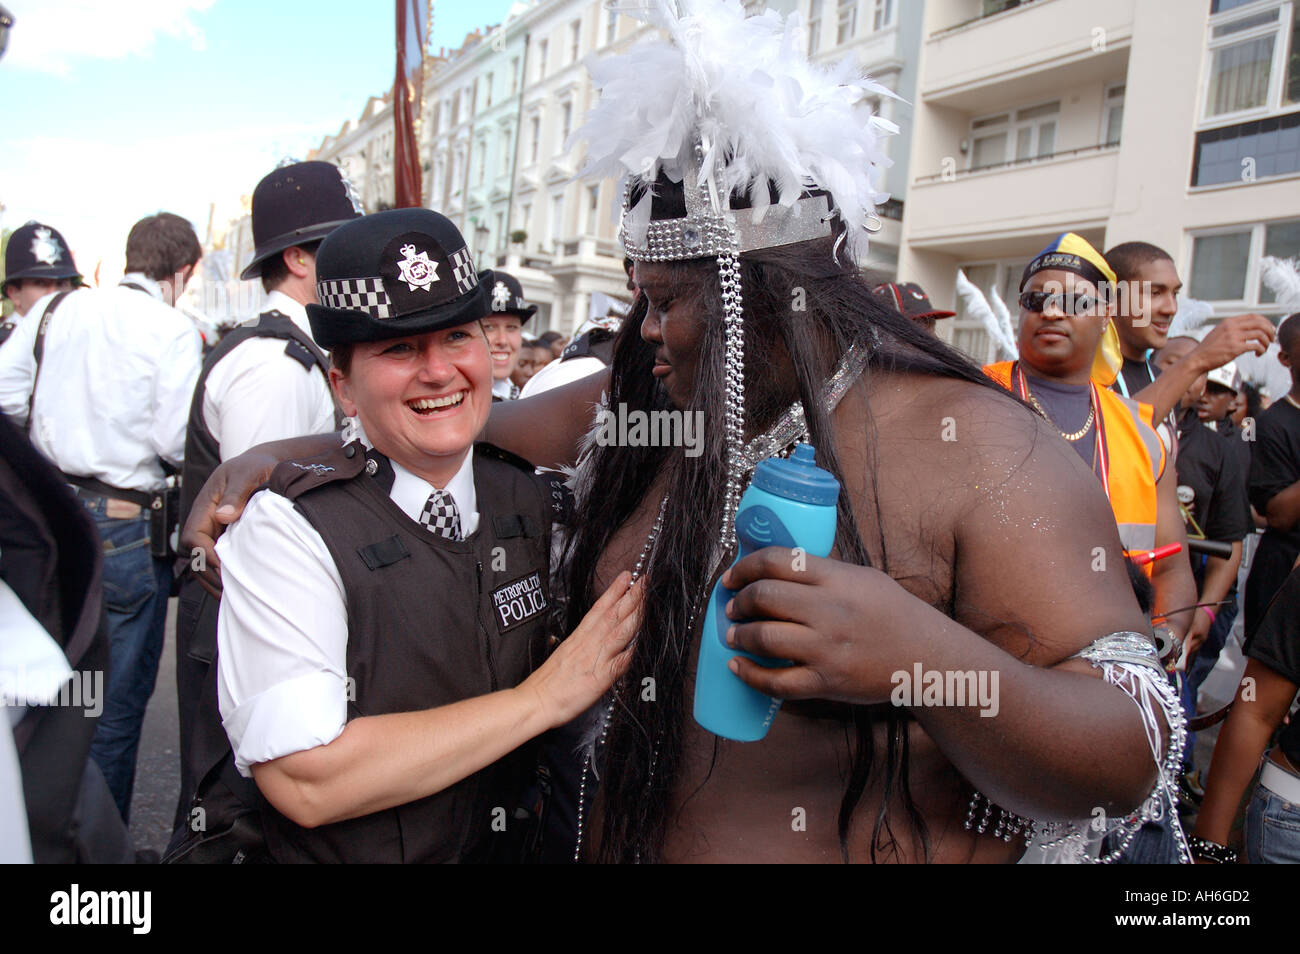 policewoman interacting and posing with very large black dancer at Notting Hill carnival. Stock Photo